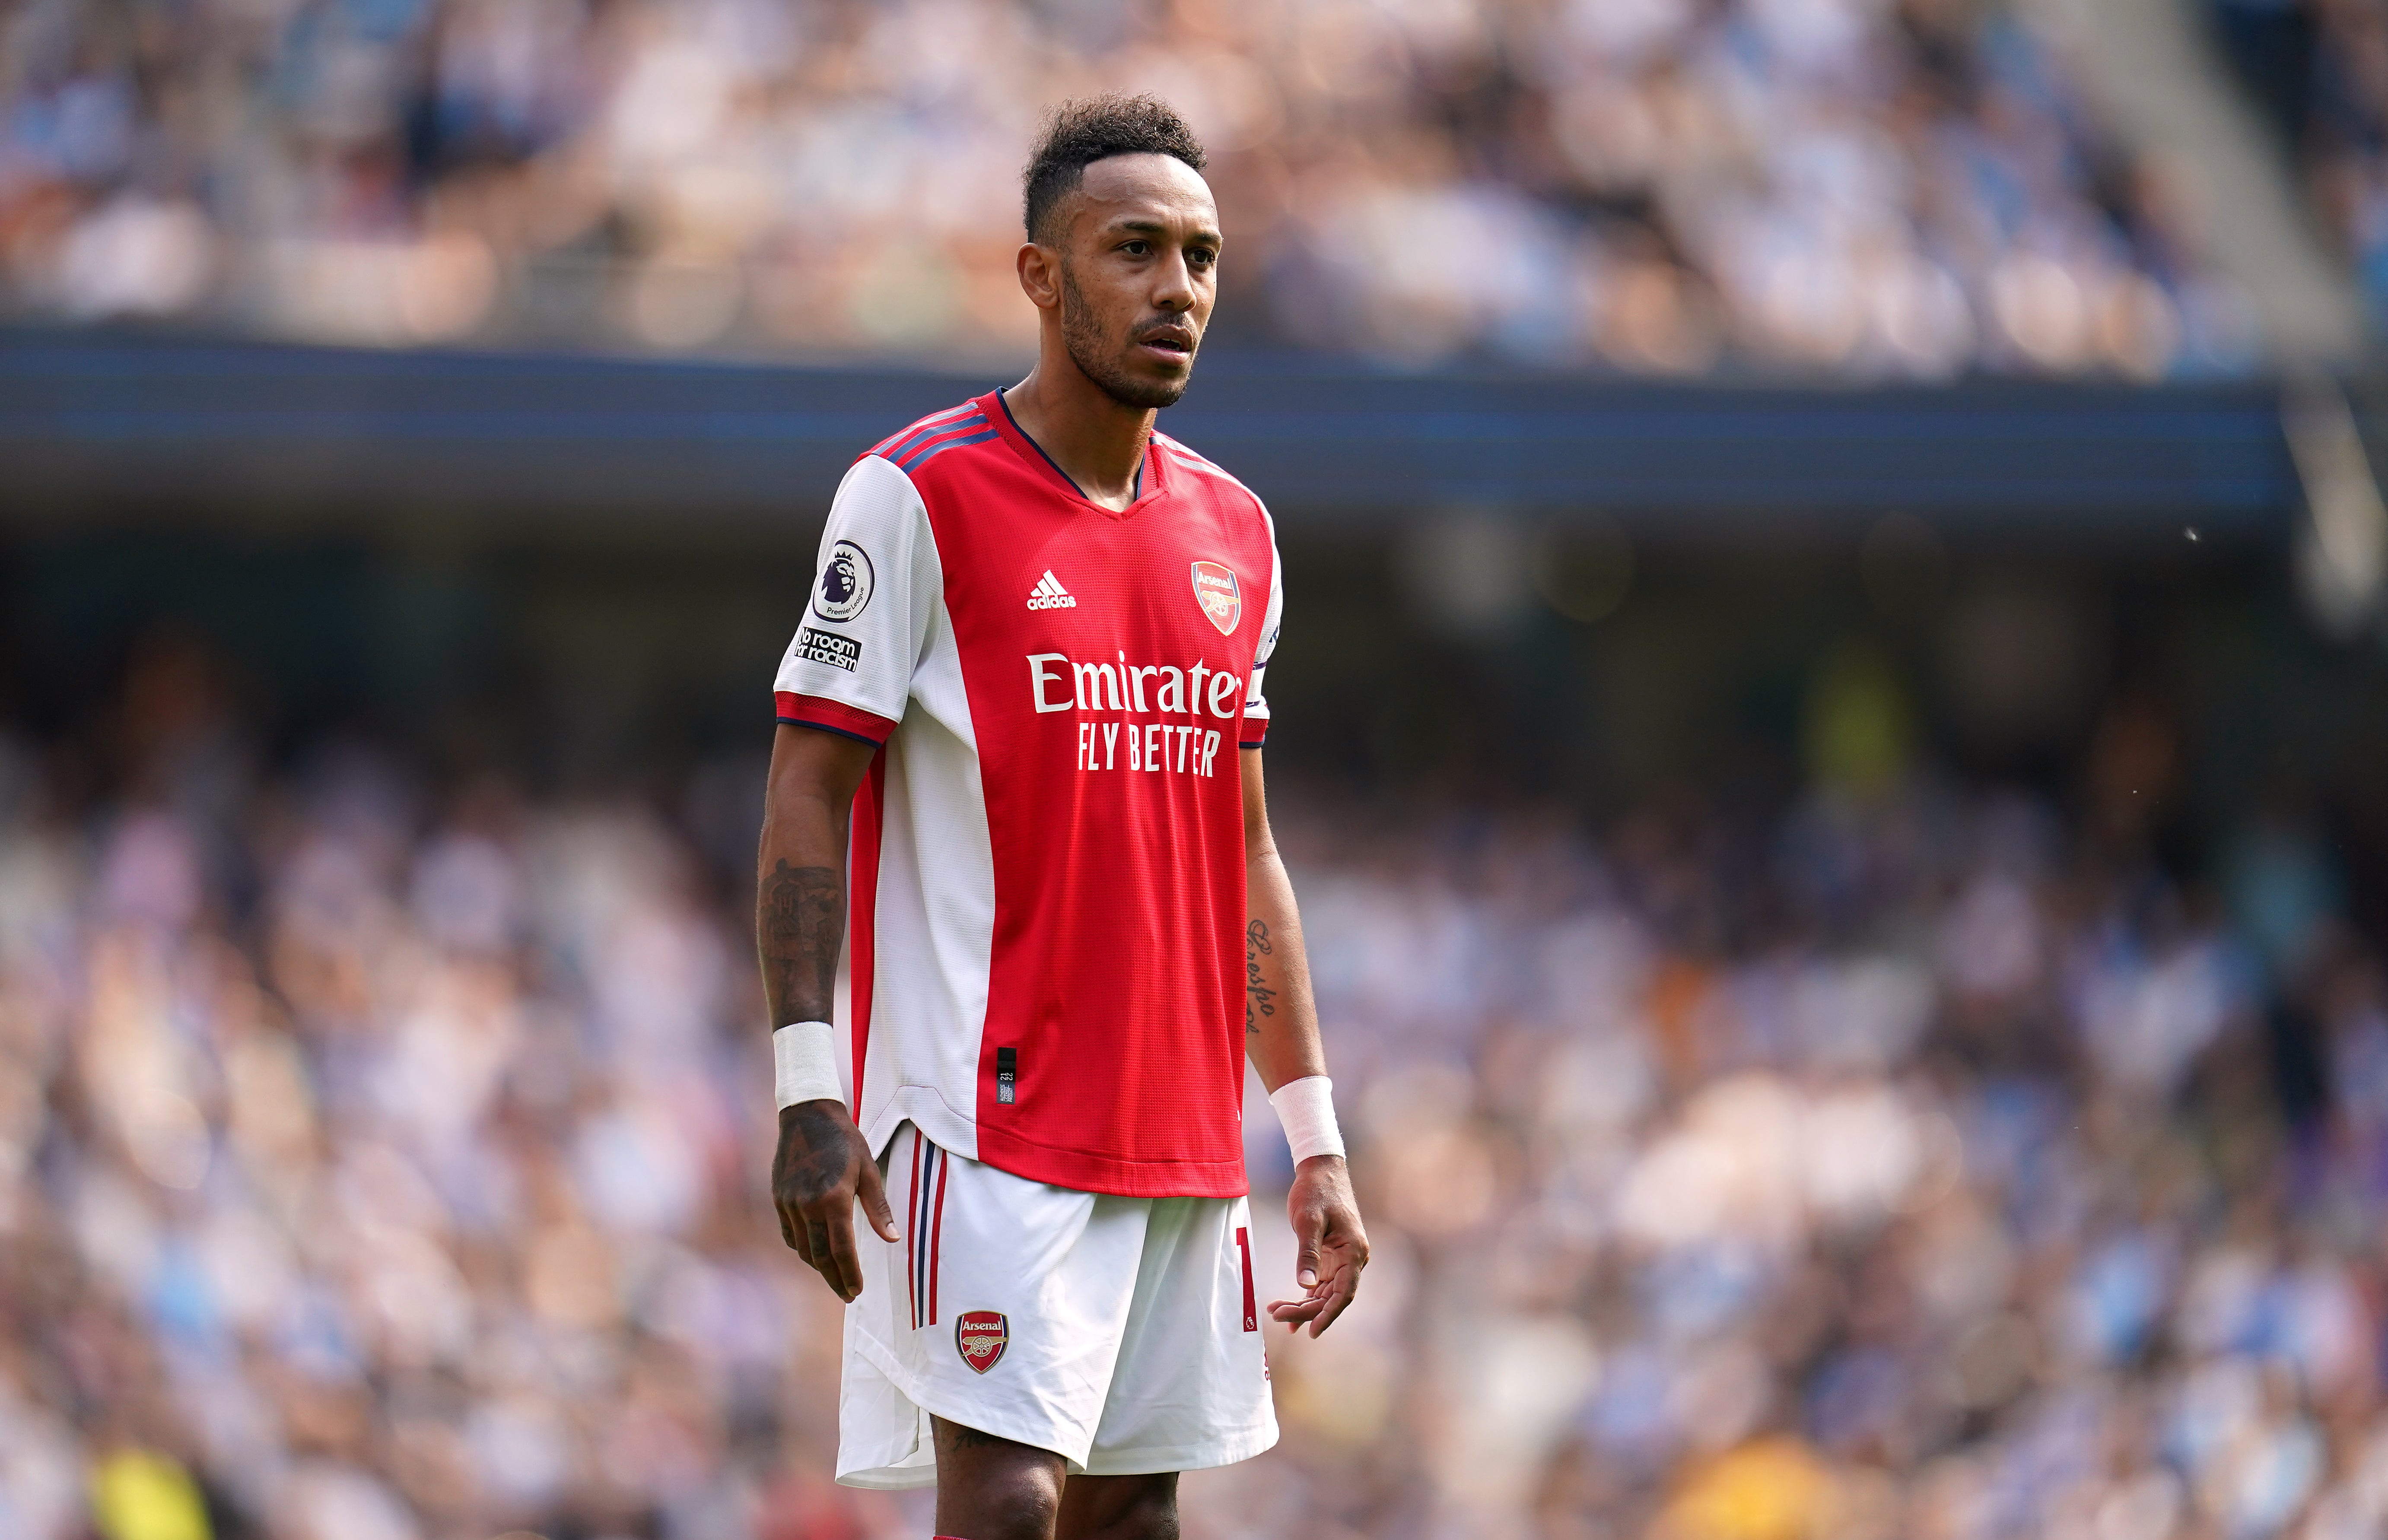 Pierre-Emerick Aubameyang tried to rally Arsenal after their dismal defeat at Manchester City (Nick Potts/PA)